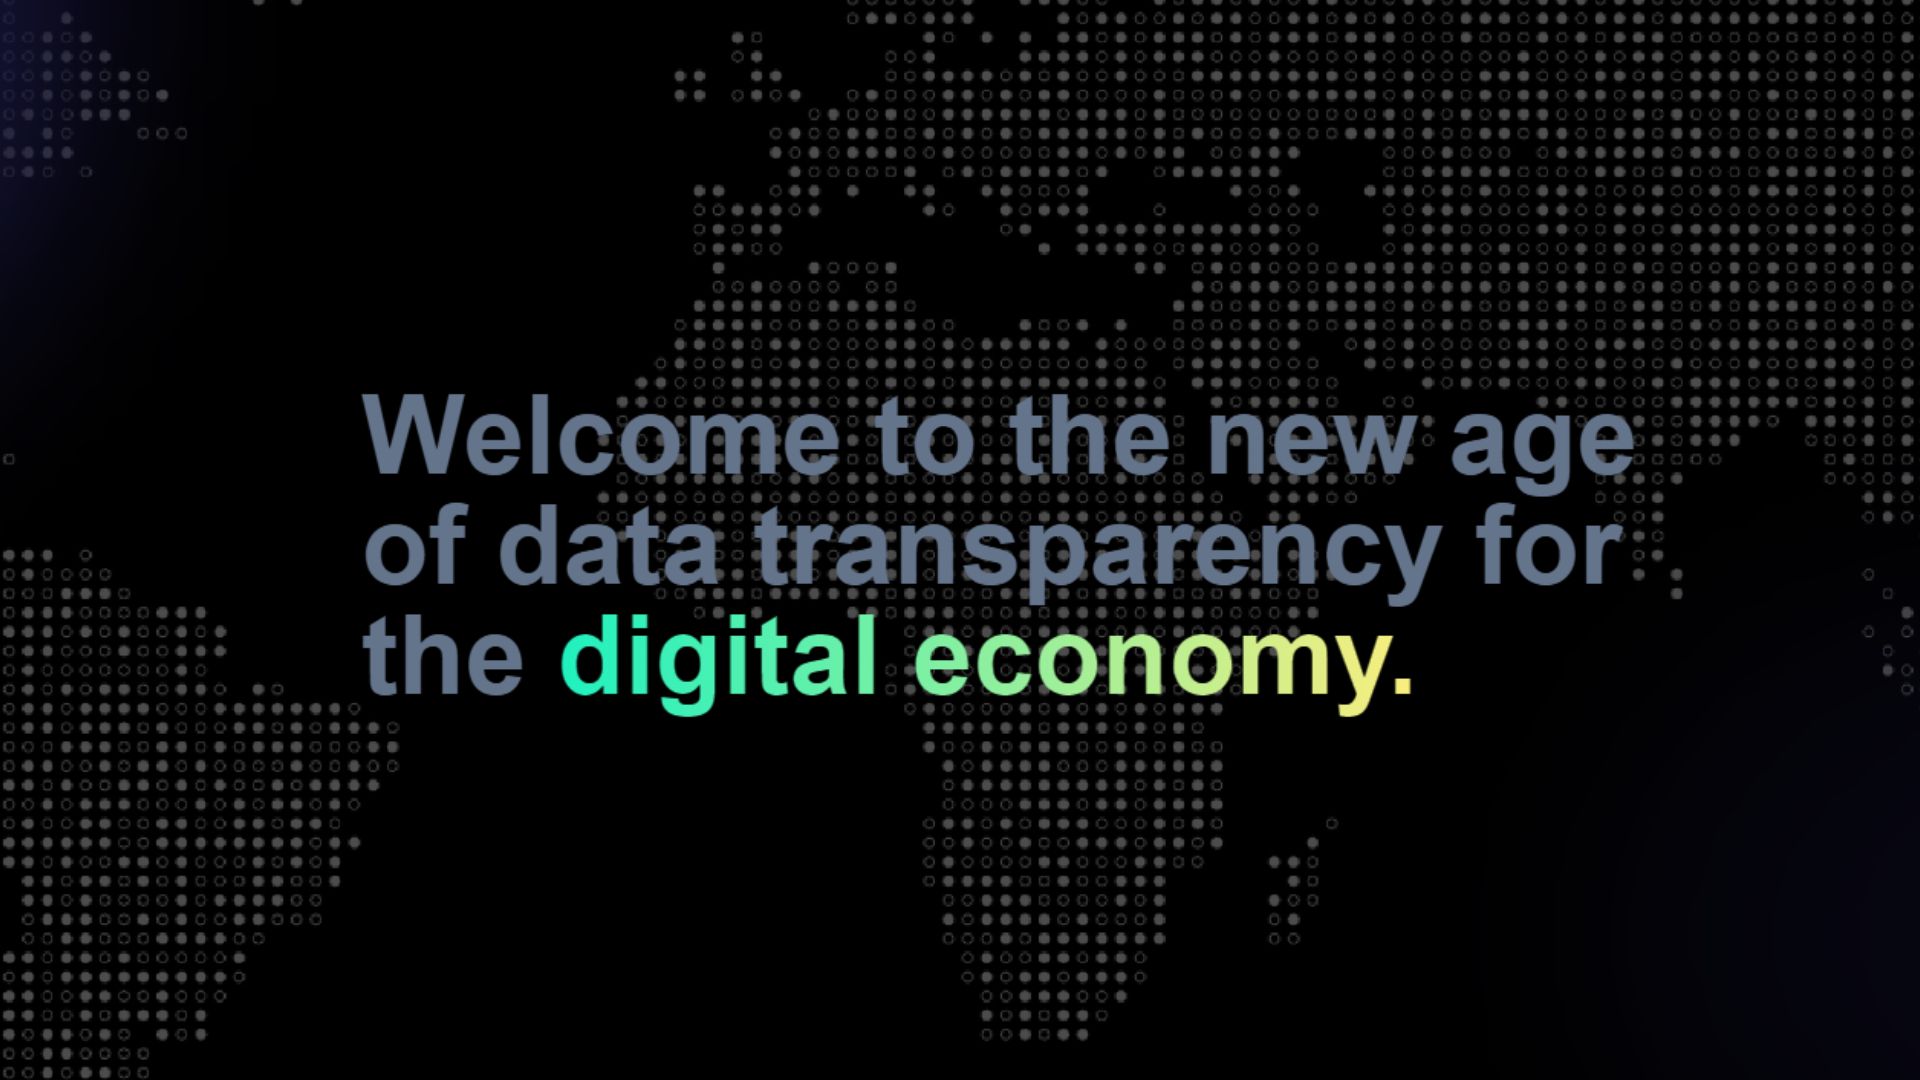 The digital economy needs a better BS detector — so we are building it through data transparency